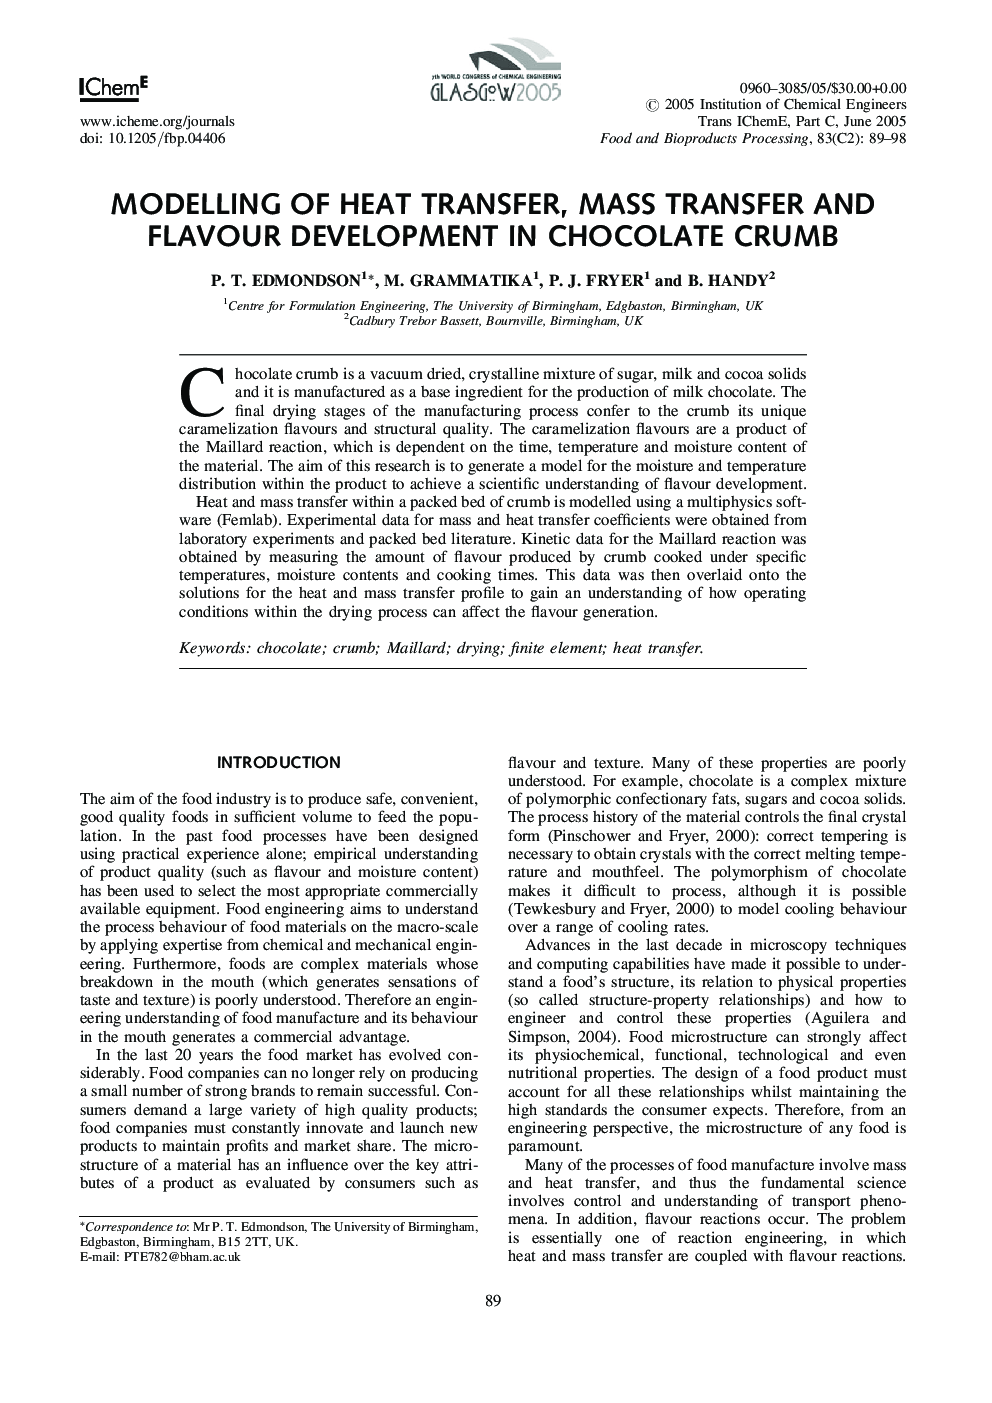 Modelling of Heat Transfer, Mass Transfer and Flavour Development in Chocolate Crumb